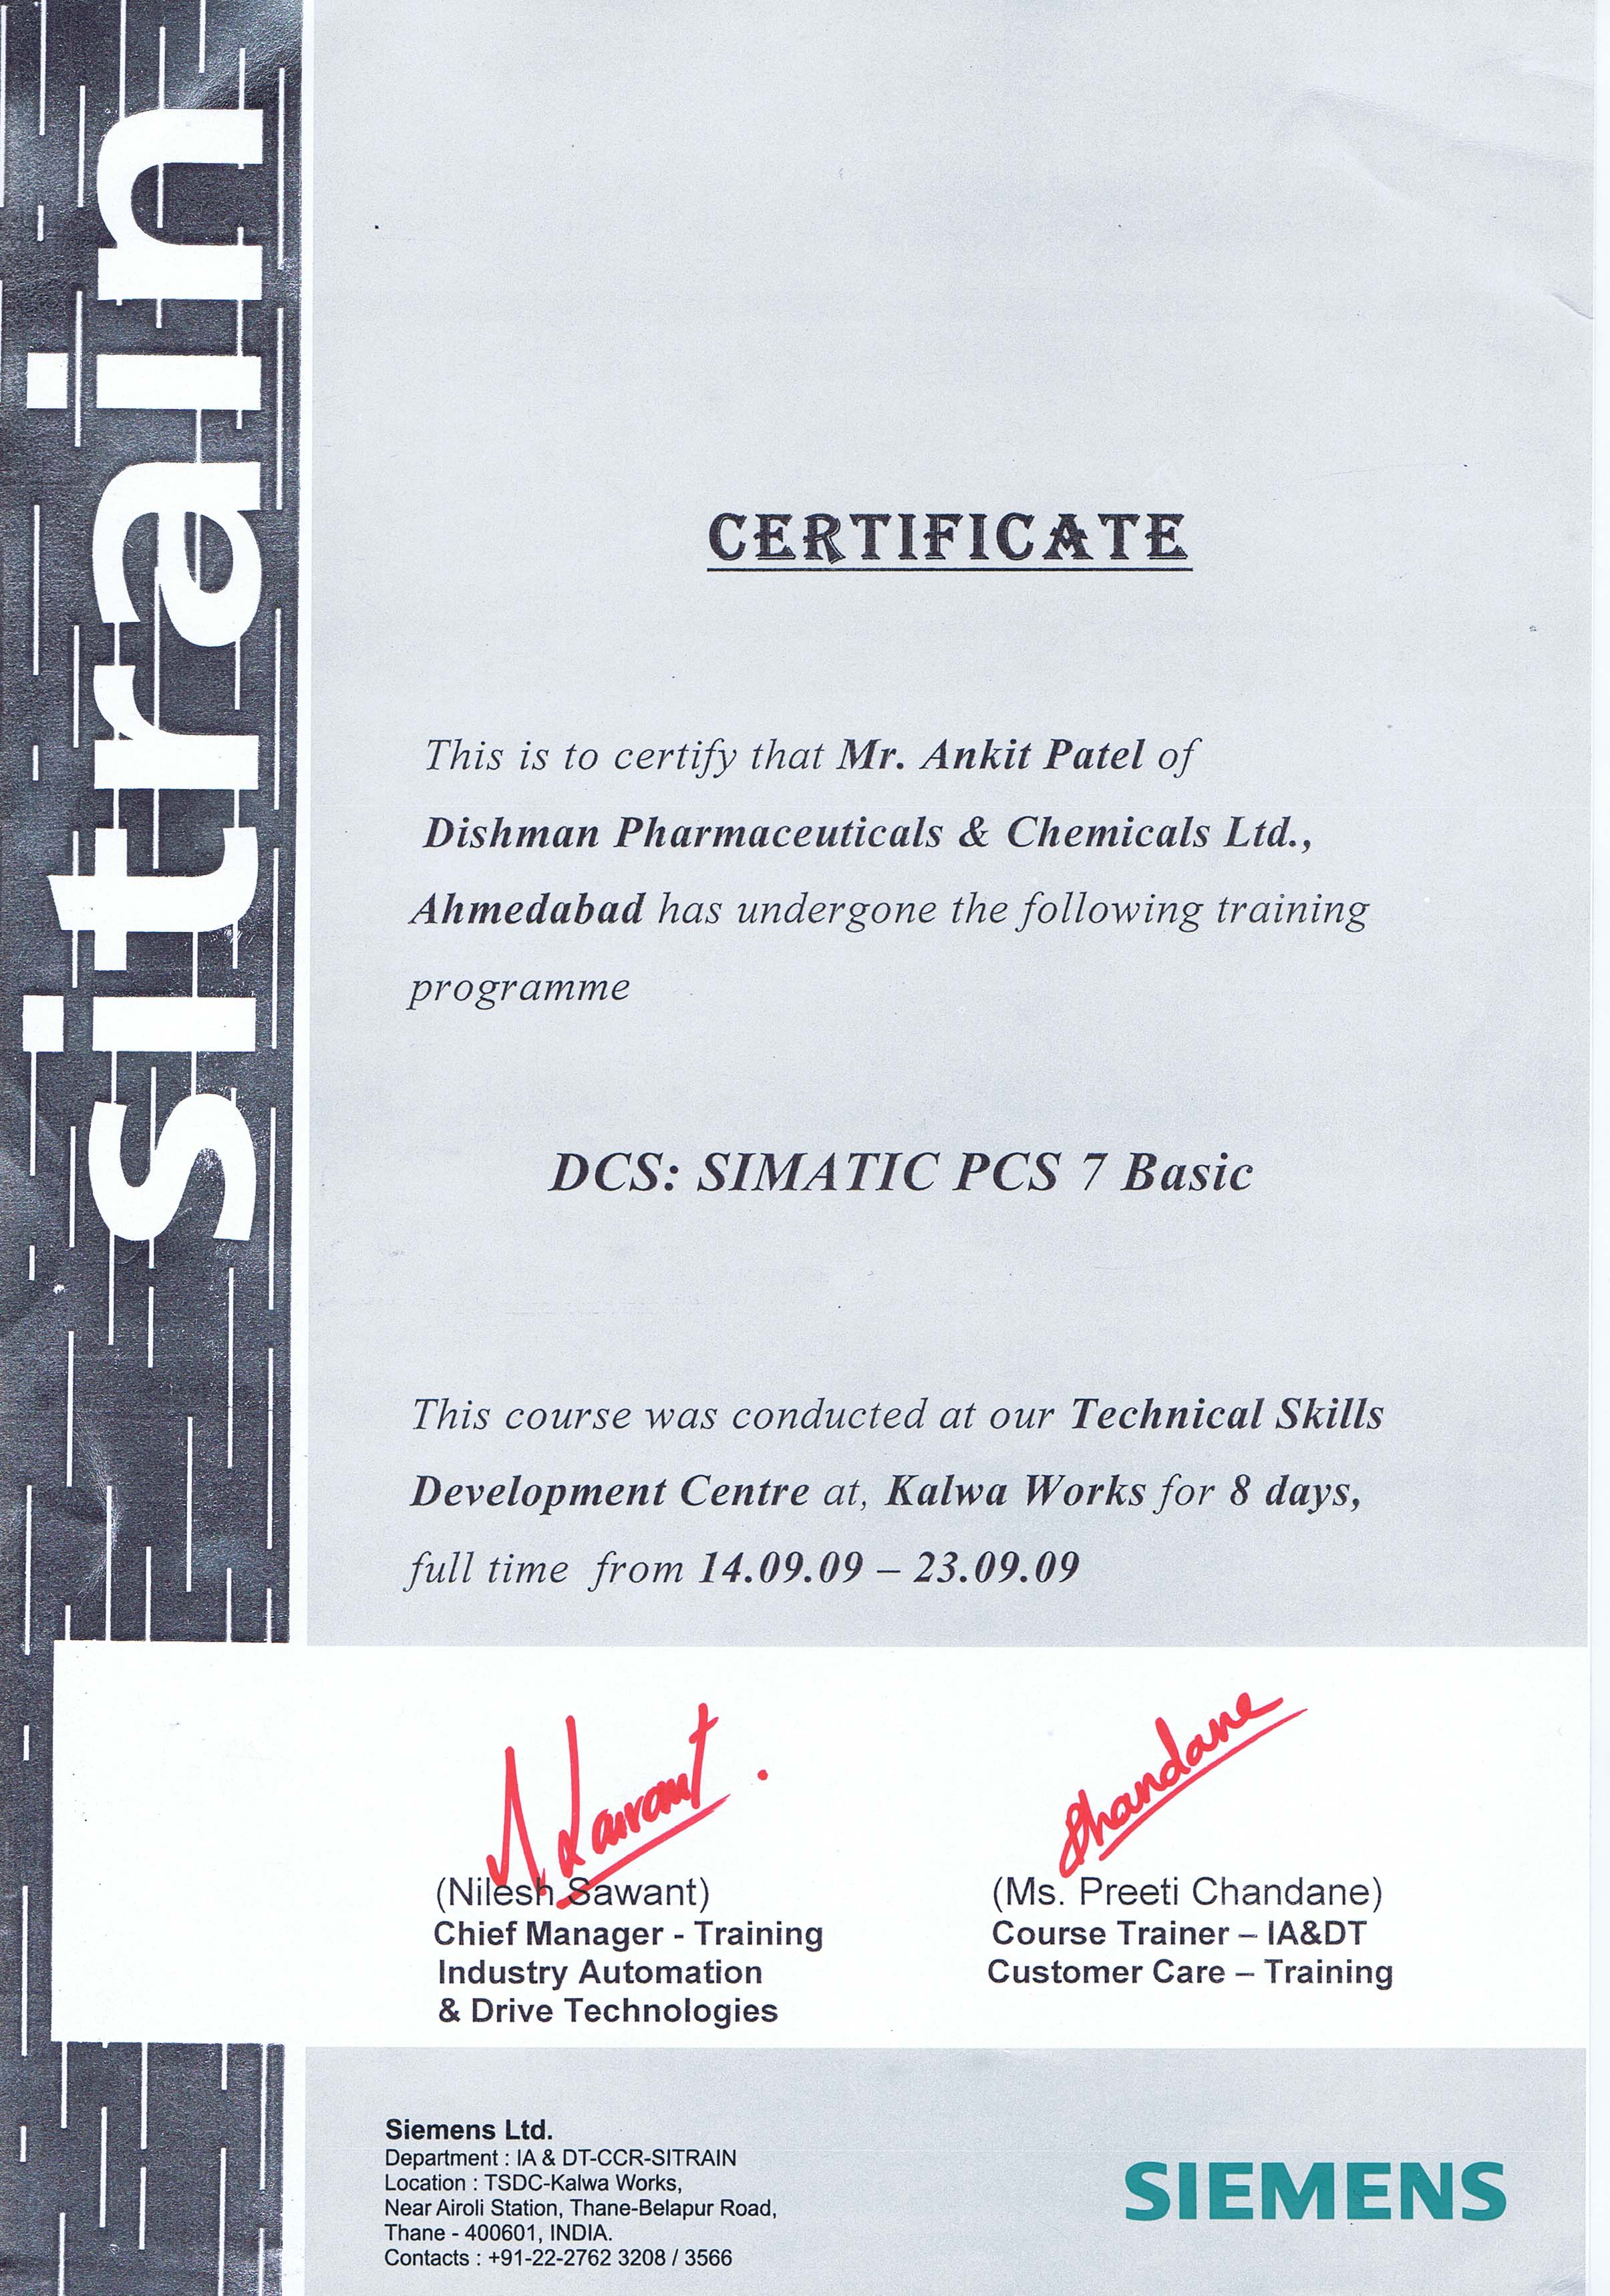 CERTIFICATE

This is to certify that Mr. Ankit Patel of

Dishman Pharmaceuticals & Chemicals Ltd.,

Ahmedabad has undergone the following training

programme

DCS: SIMATIC PCS 7 Basic

This course was conducted at our Technical Skills

Development Centre at, Kalwa Works for 8 days,
full time from 14.09.09 — 23.09.09

ow
(Nilesh Sawant)
Chief Manager - Training

Industry Automation
& Drive Technologies

Siemens Ltd.

Department : IA & DT-CCR-SITRAIN
Location : TSDC-Kalwa Works,

Near Airoli Station, Thane-Belapur Road,
Thane - 400601, INDIA.

Contacts : +91-22-2762 3208 / 3566

a

(Ms. Preeti Chandane)
Course Trainer — IA&DT
Customer Care — Training

SIEMENS